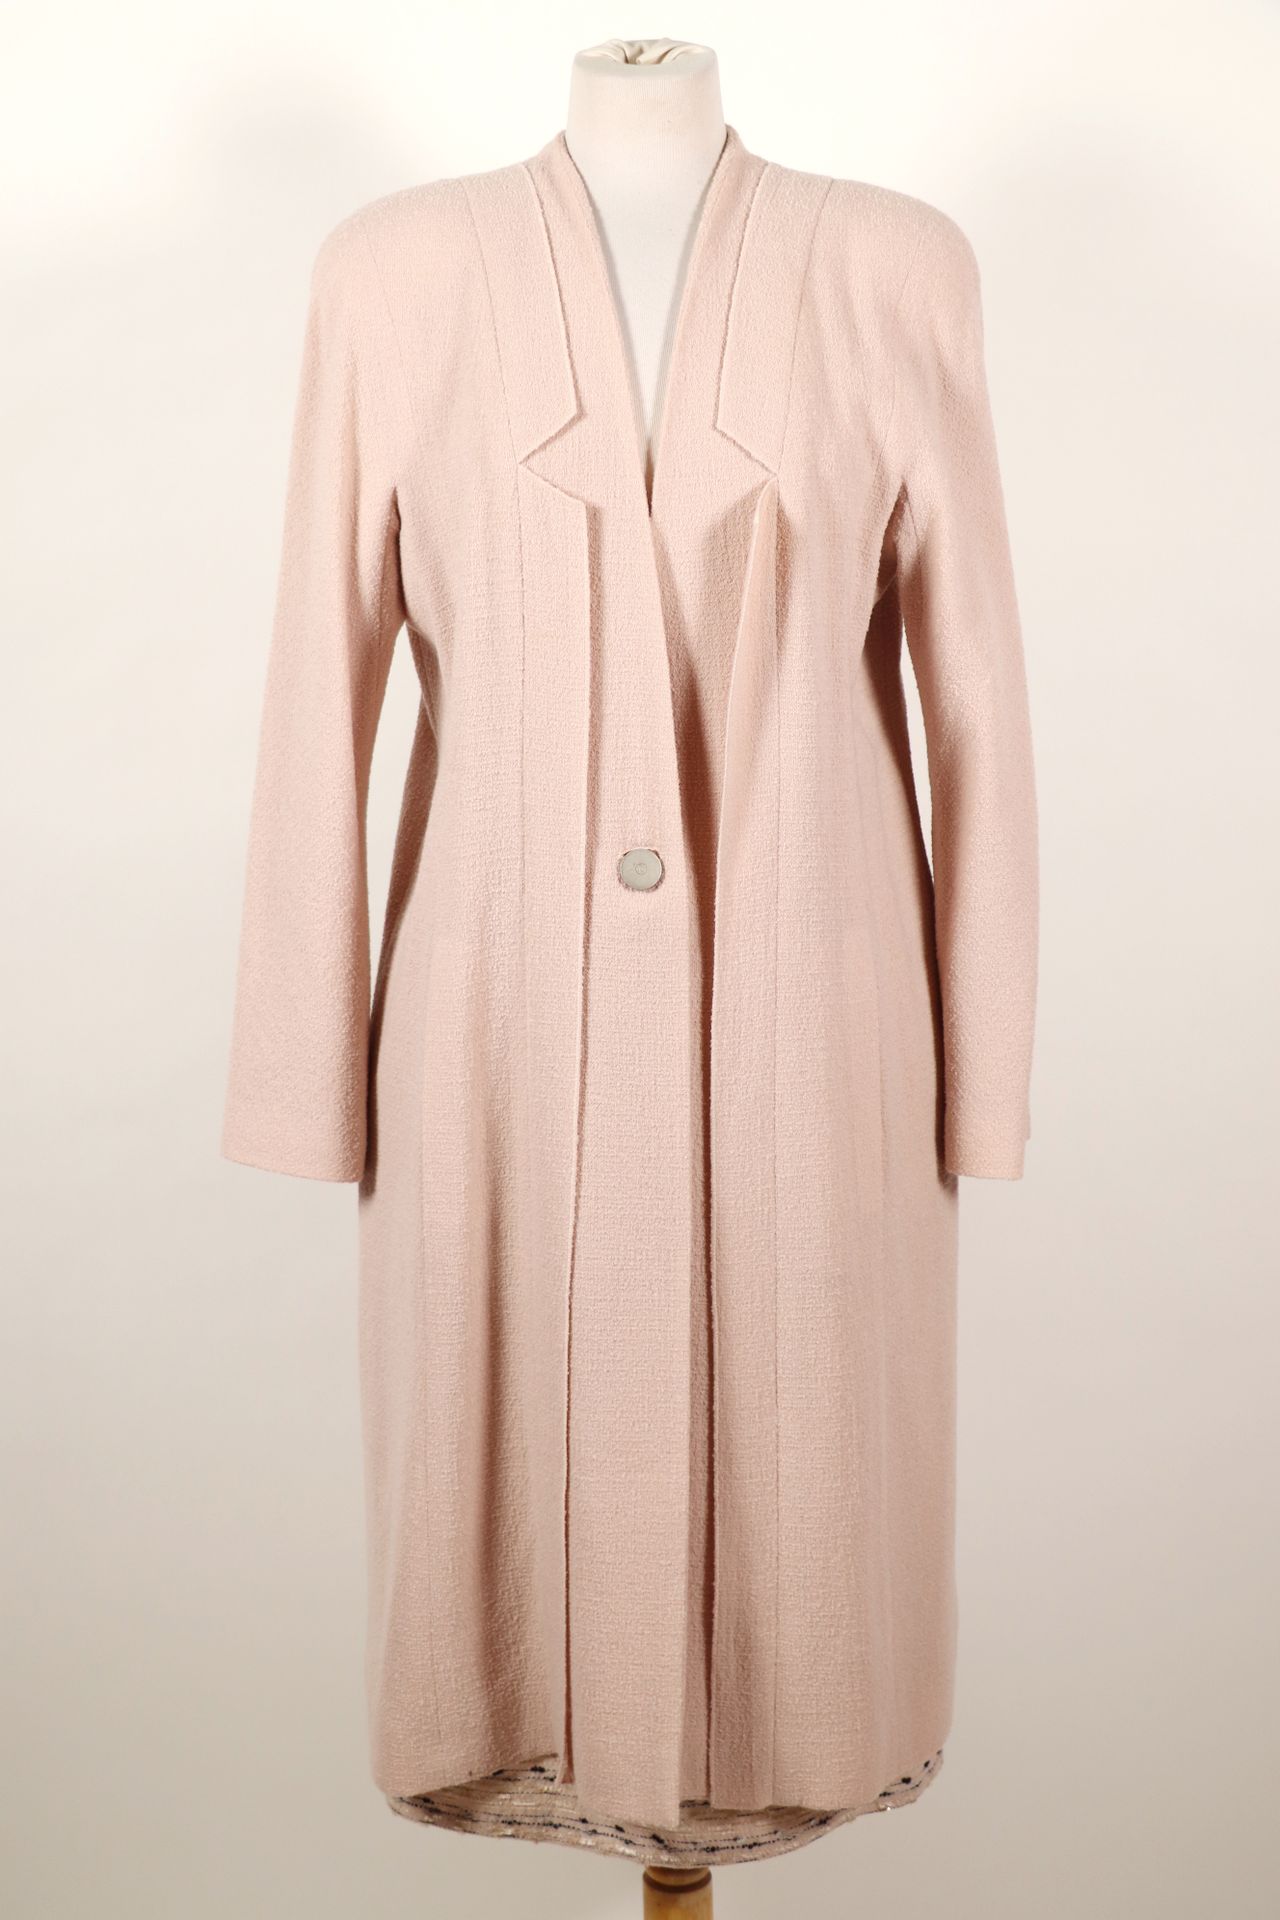 Null CHANEL - Pink suit, jacket and skirt in wool and polyamide. The long jacket&hellip;